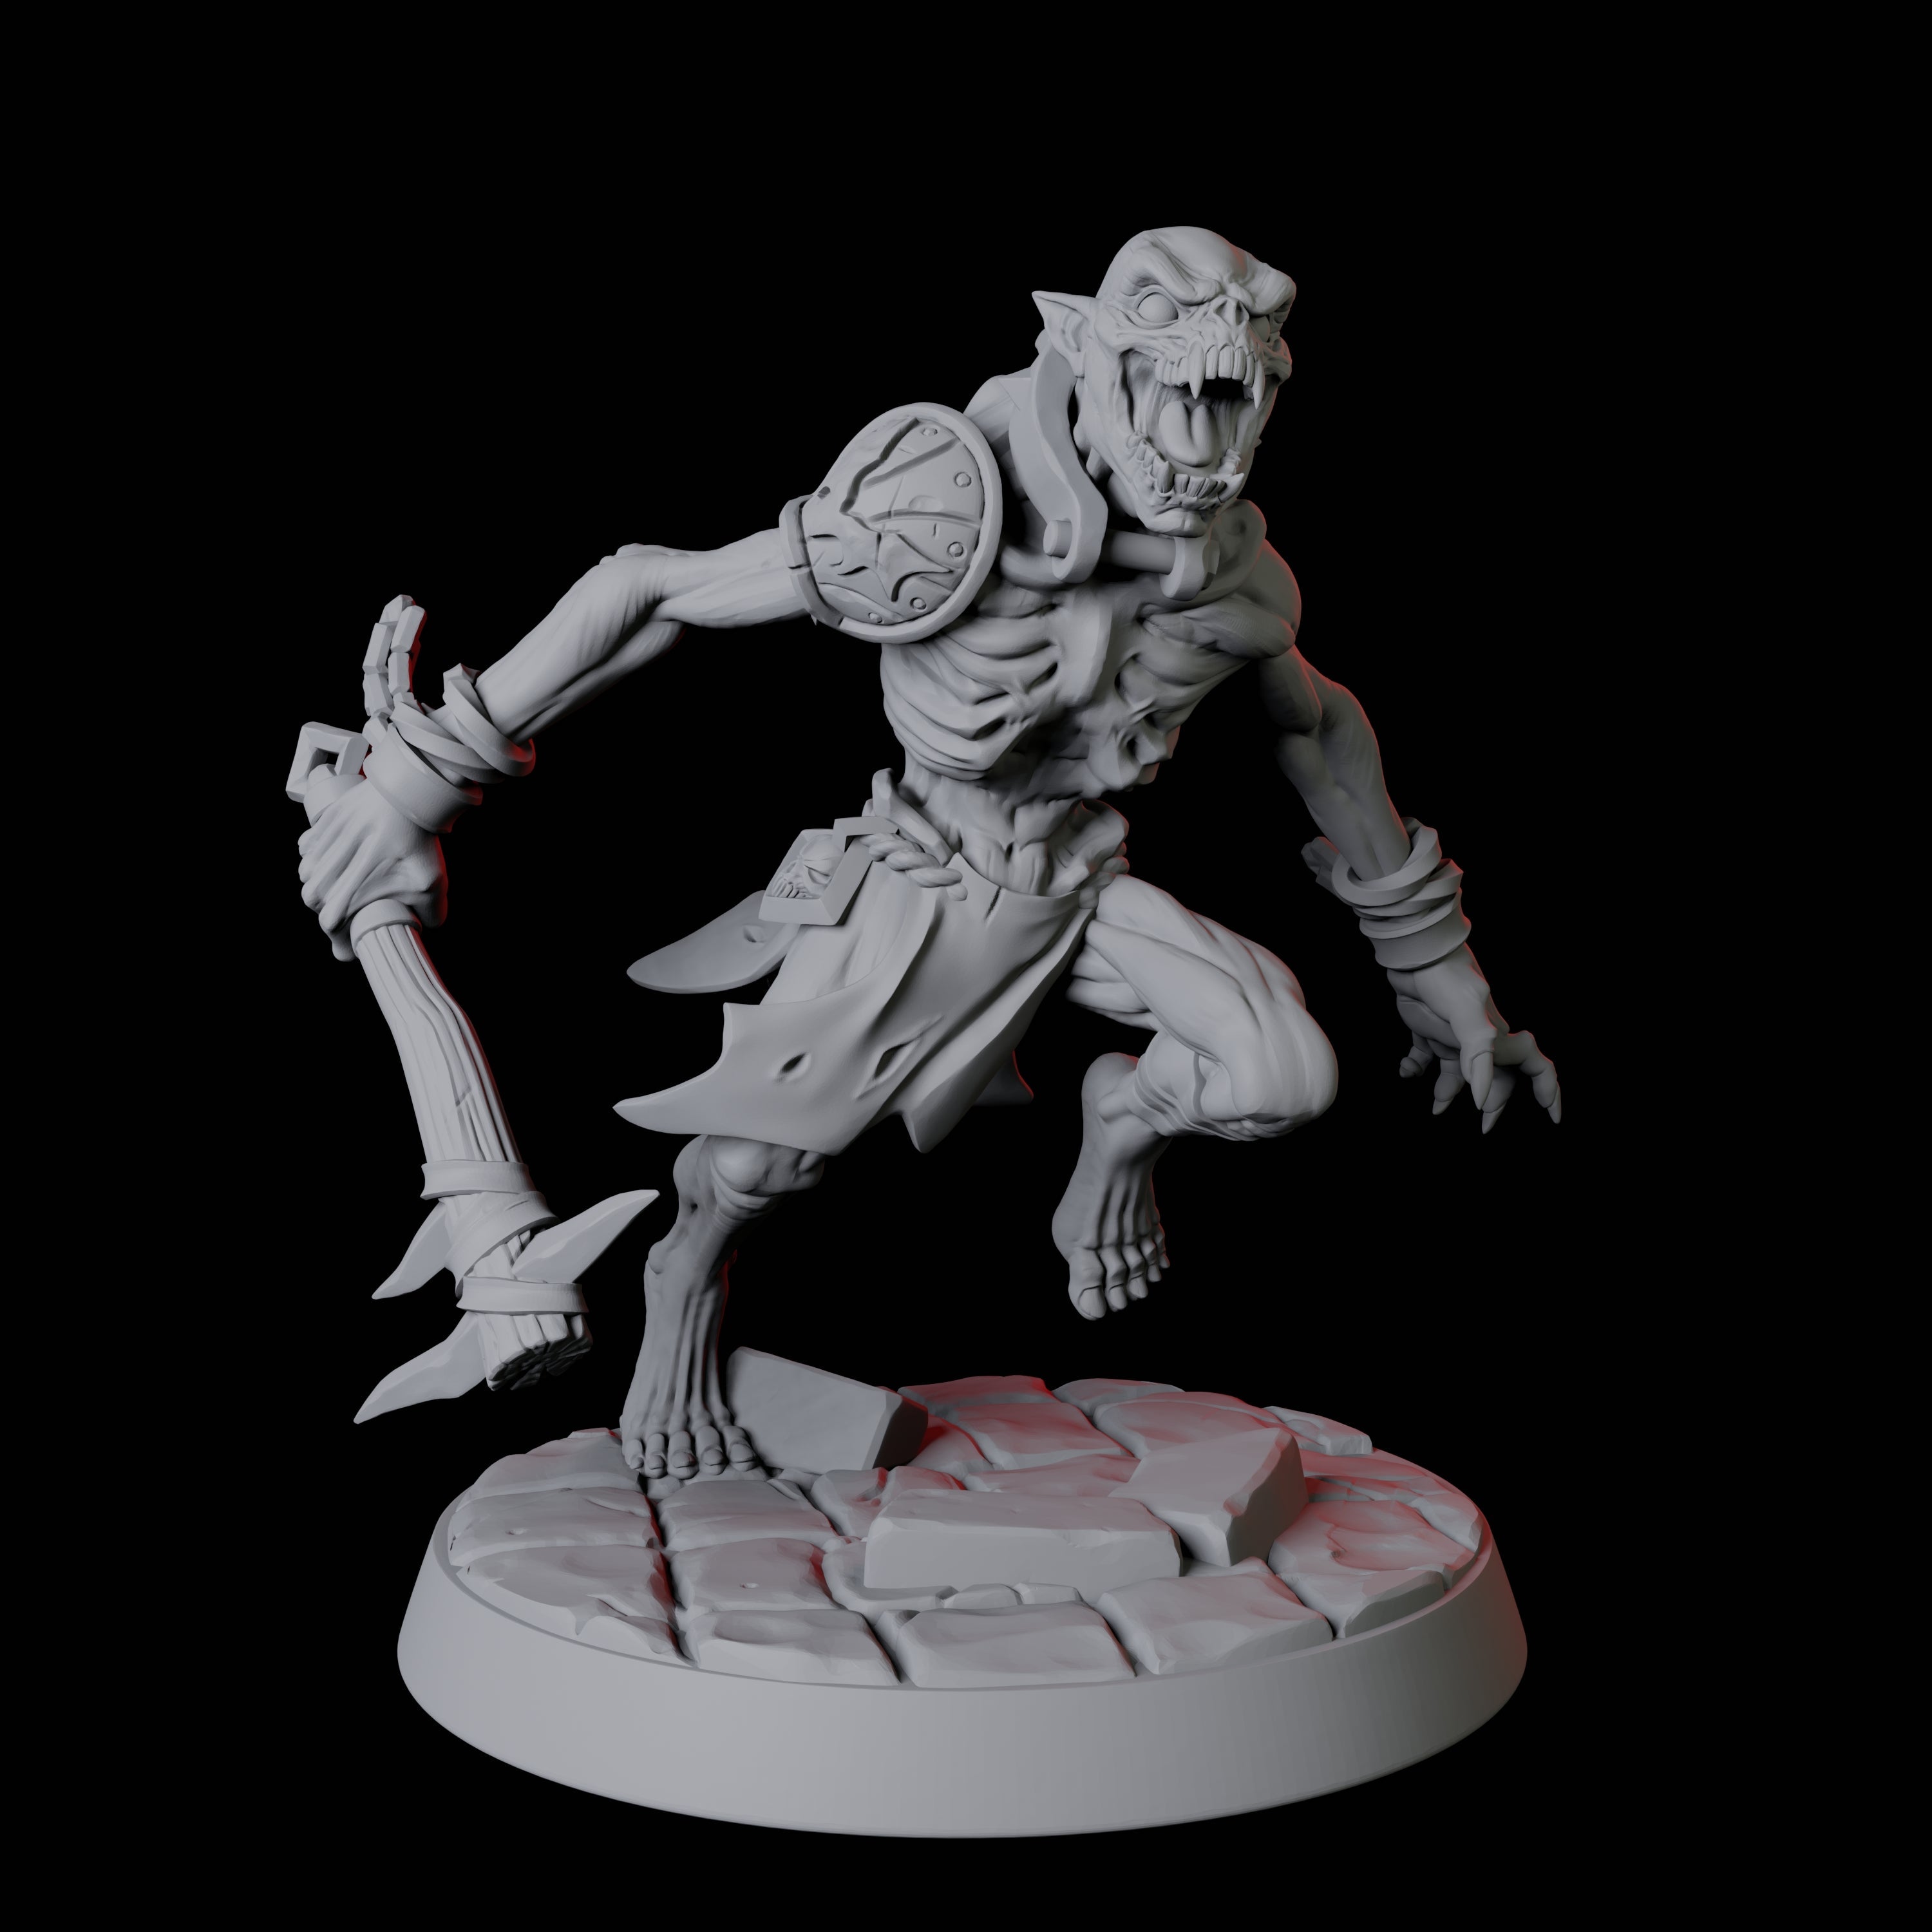 Six Creeping Ghouls Miniature for Dungeons and Dragons, Pathfinder or other TTRPGs